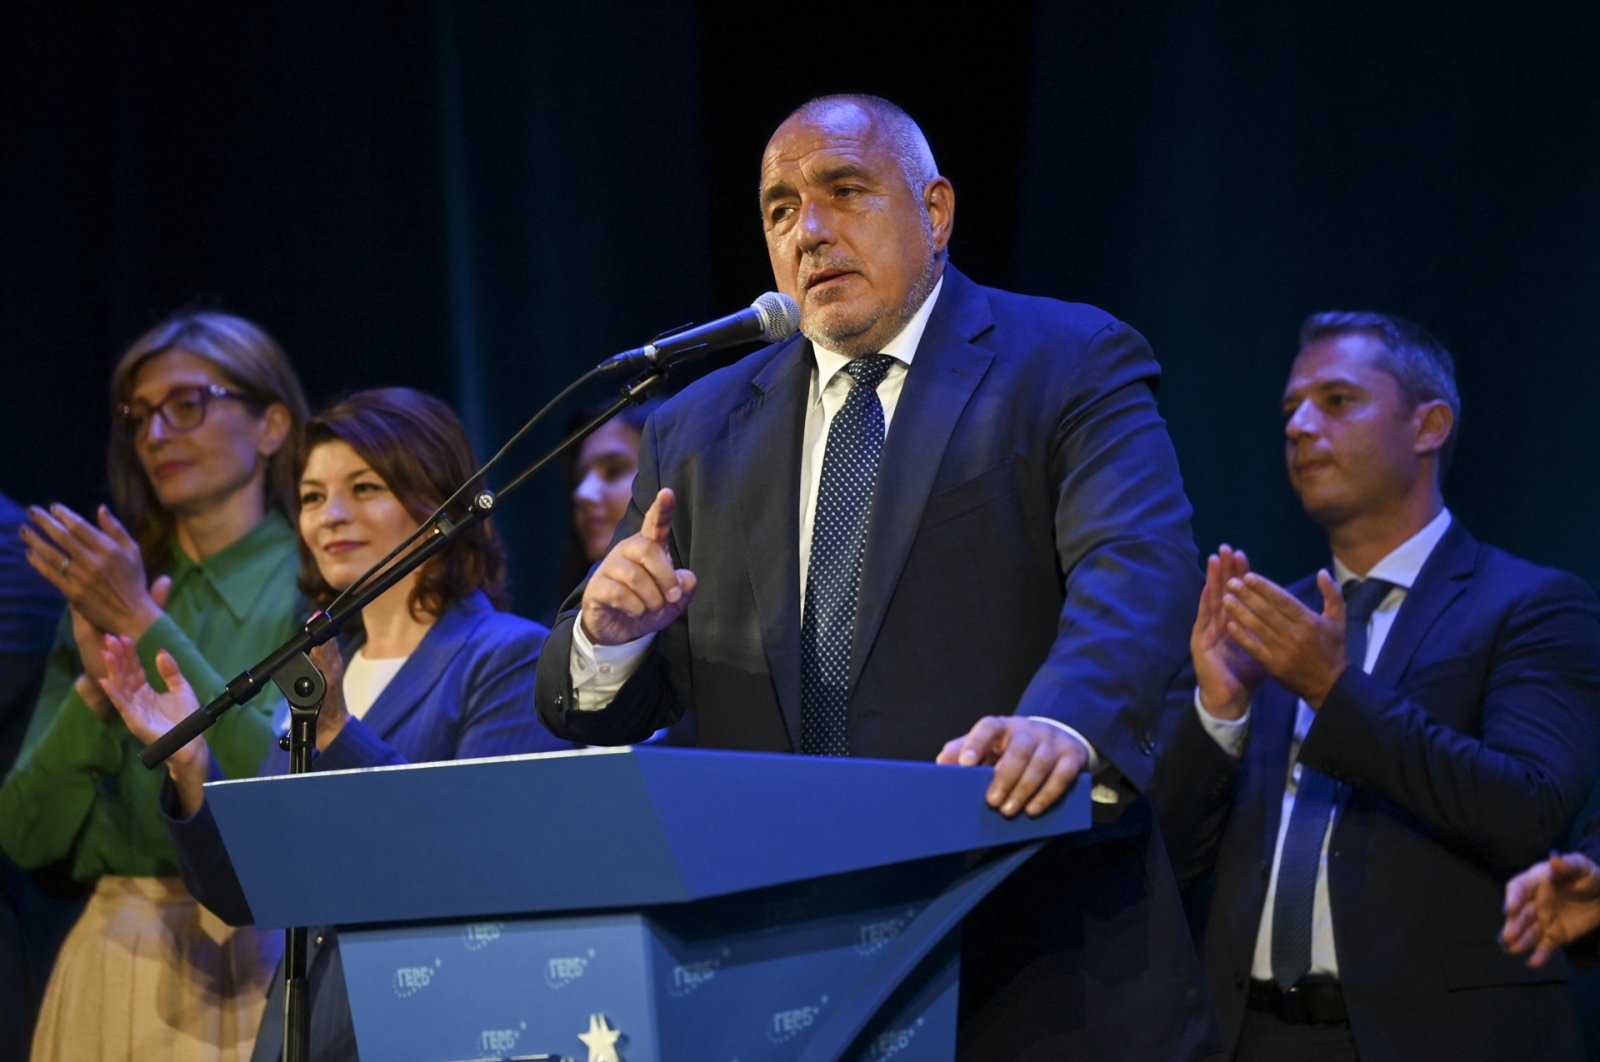 The head of the GERB party, former Prime Minister Boyko Borisov, delivers a speech during a preelection rally ahead of the election, Plovdiv, Bulgaria, Sept. 30, 2022. (AFP Photo)